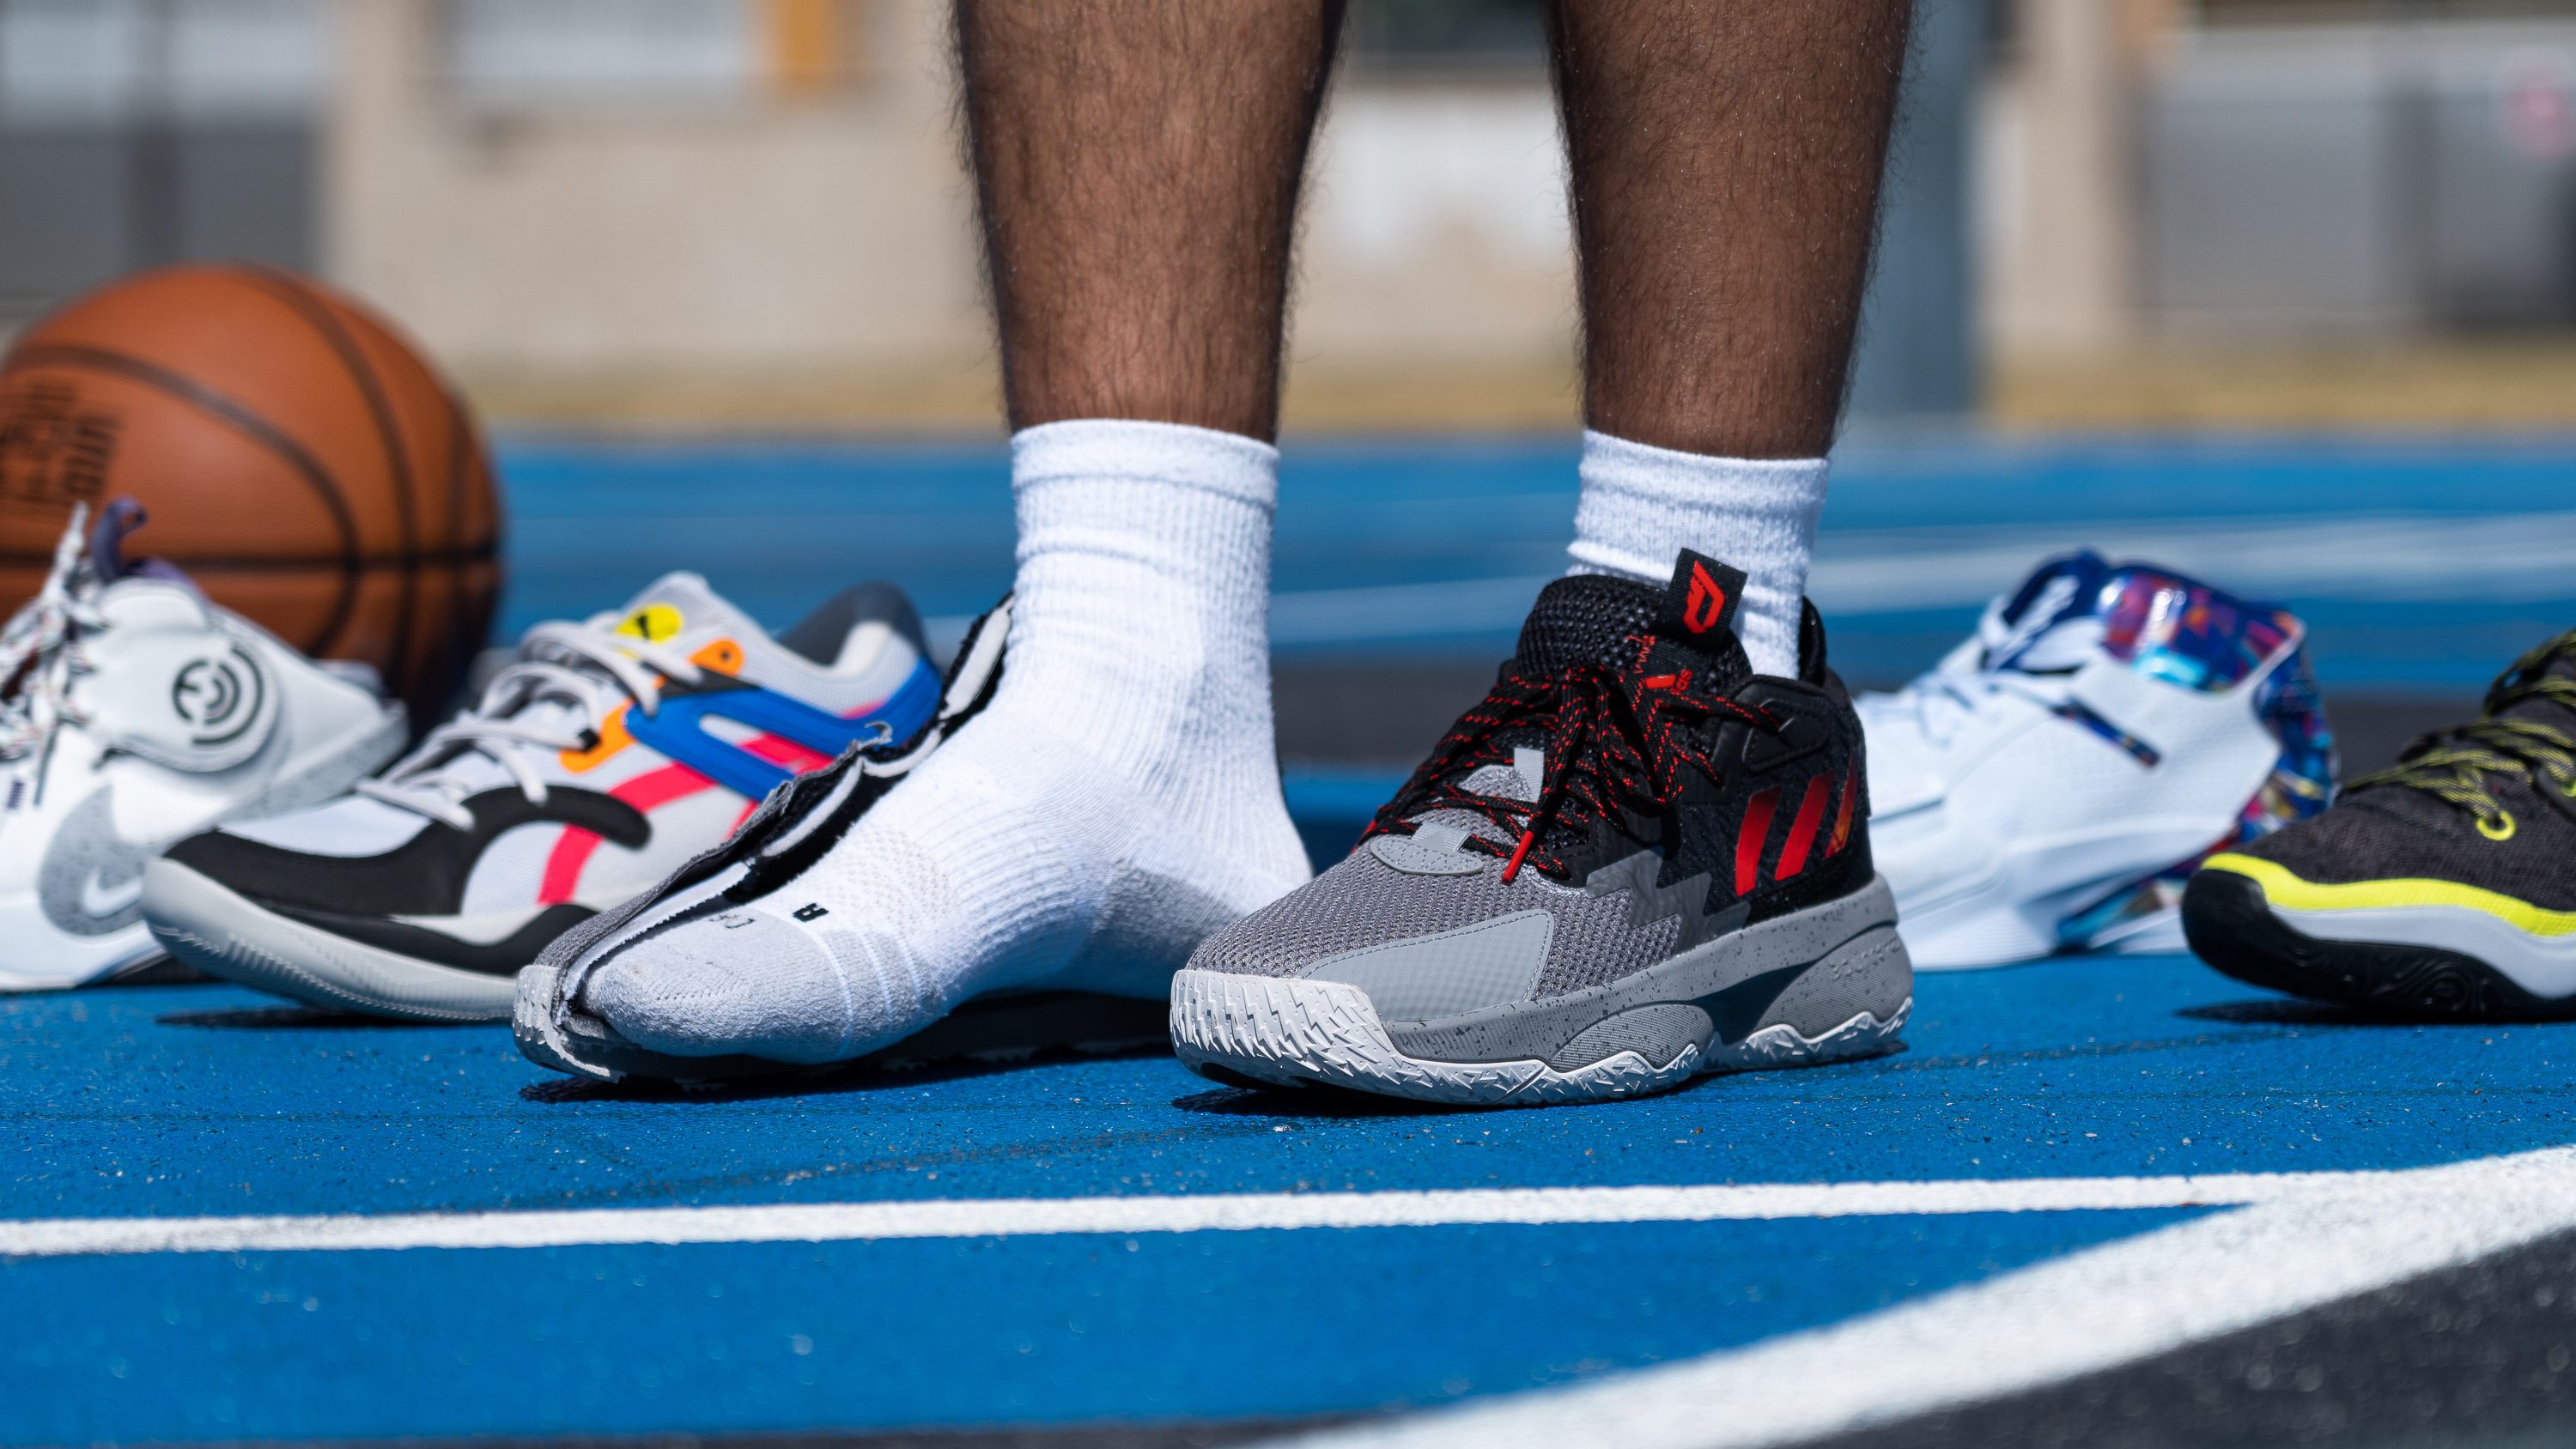 7 Best Basketball Shoes For Ankle Support